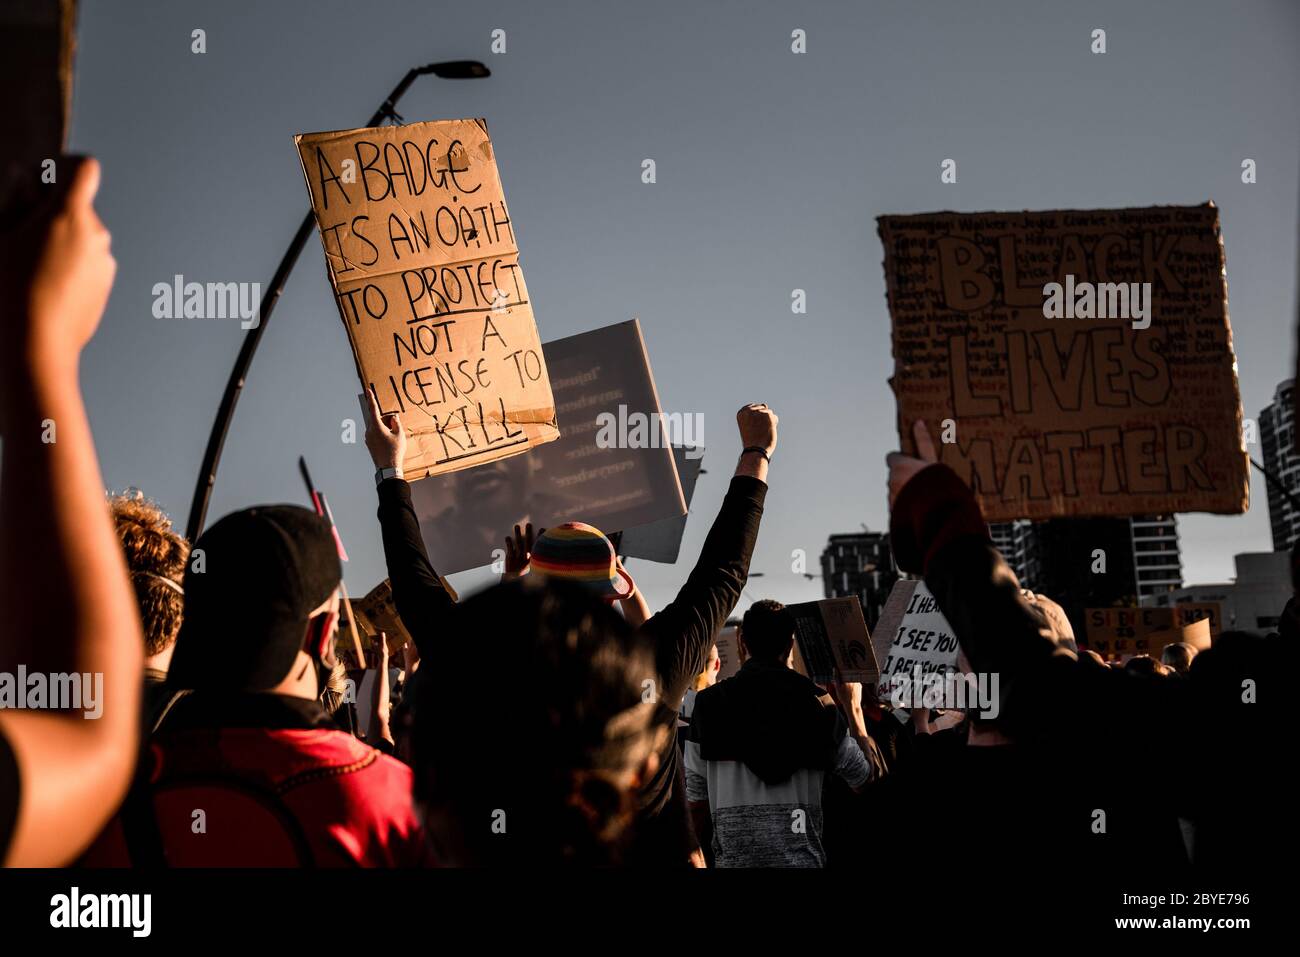 Protestor shouts at a BLM protest Stock Photo